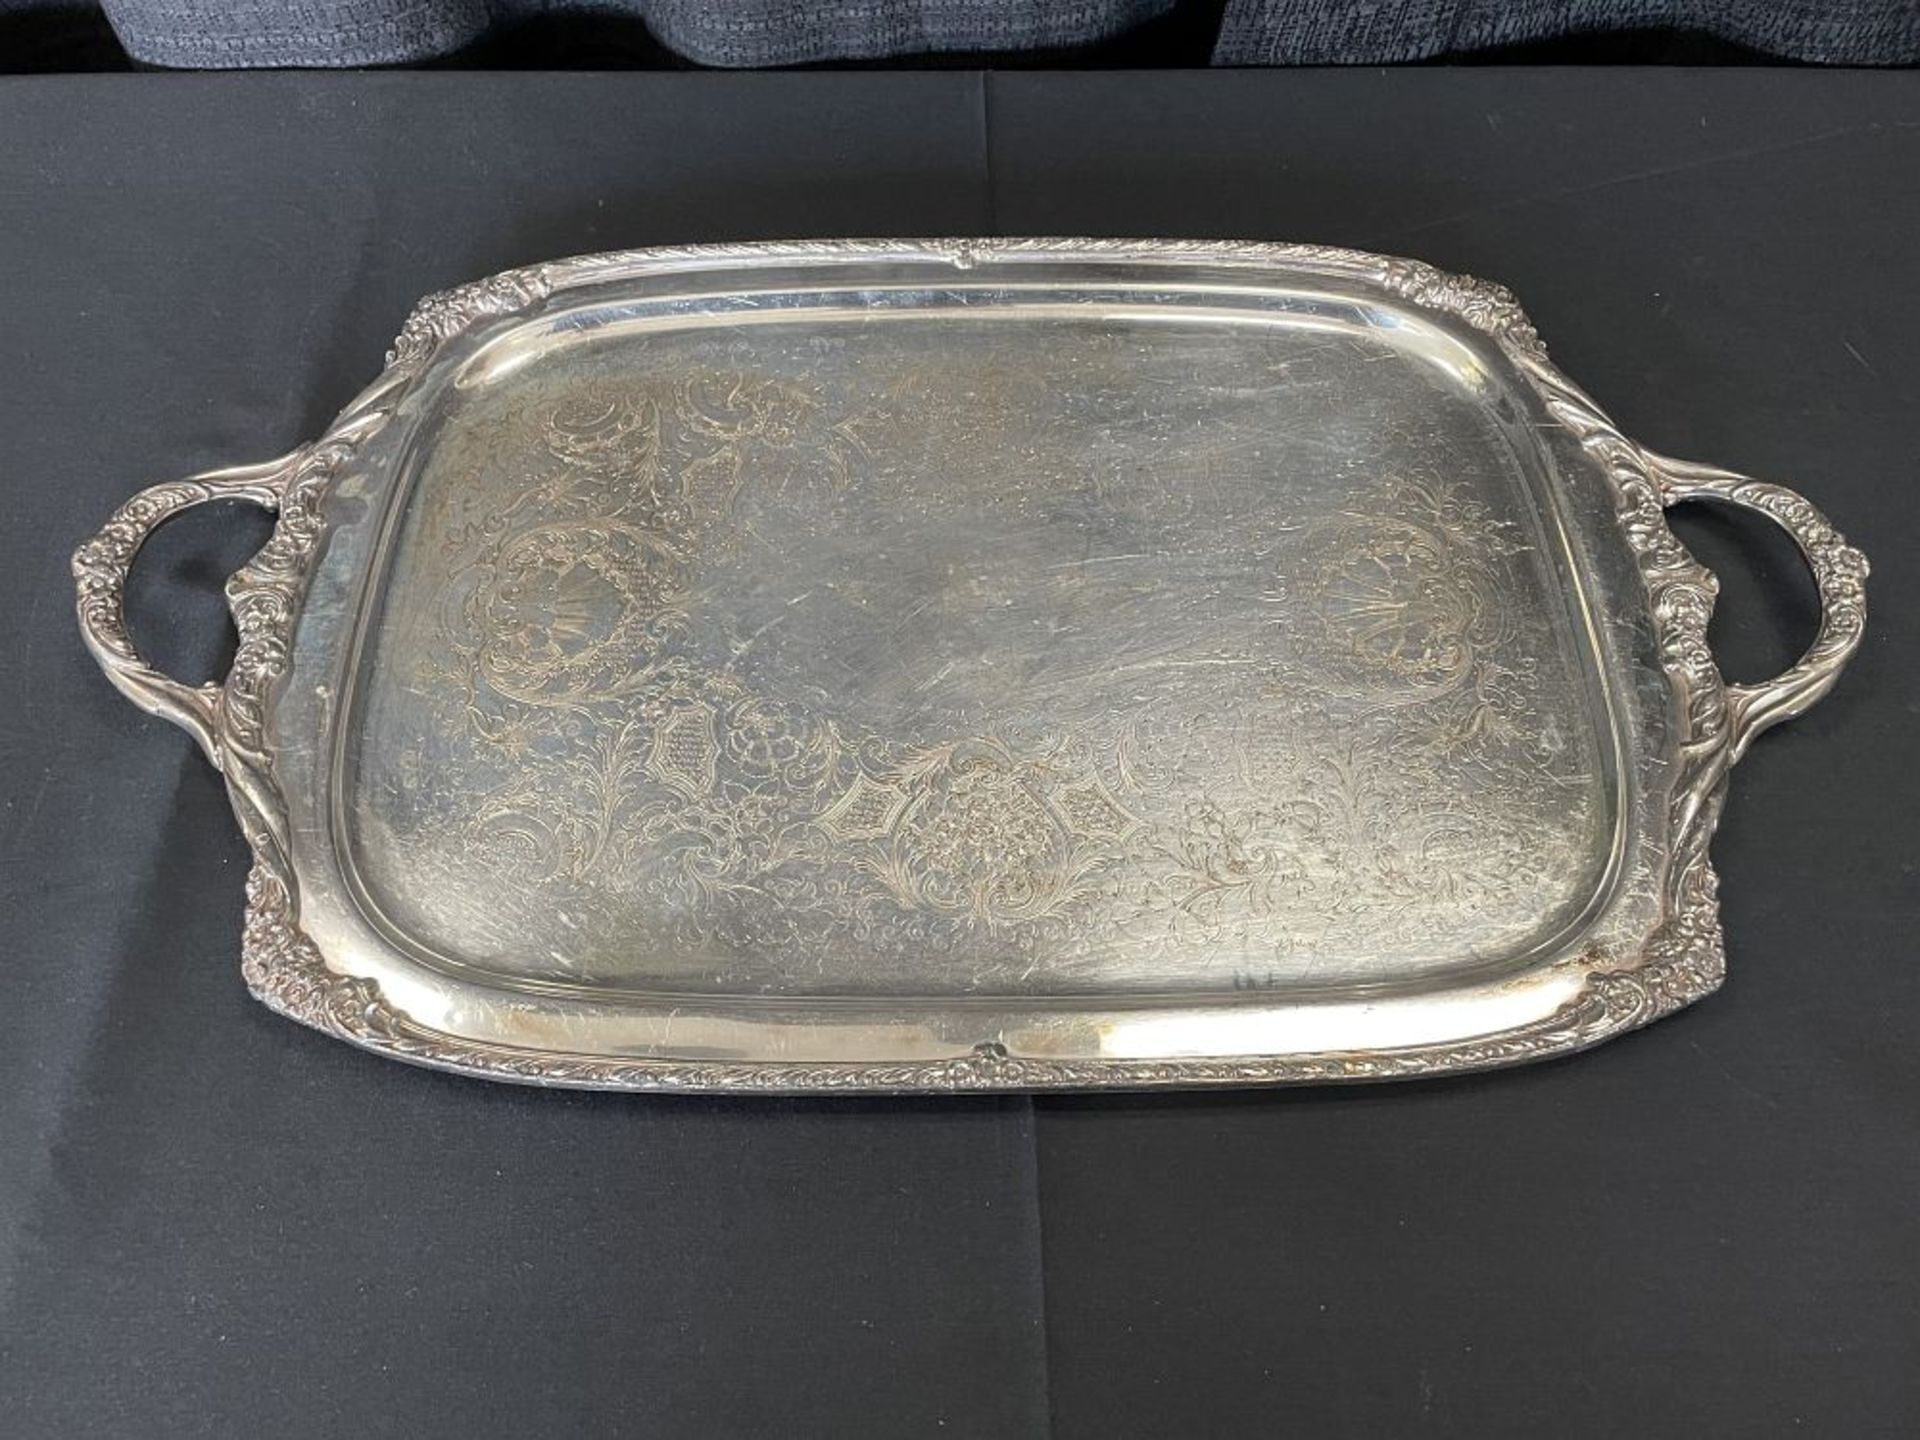 17" x 24" Handled Silver Plate Serving Tray - Image 2 of 2